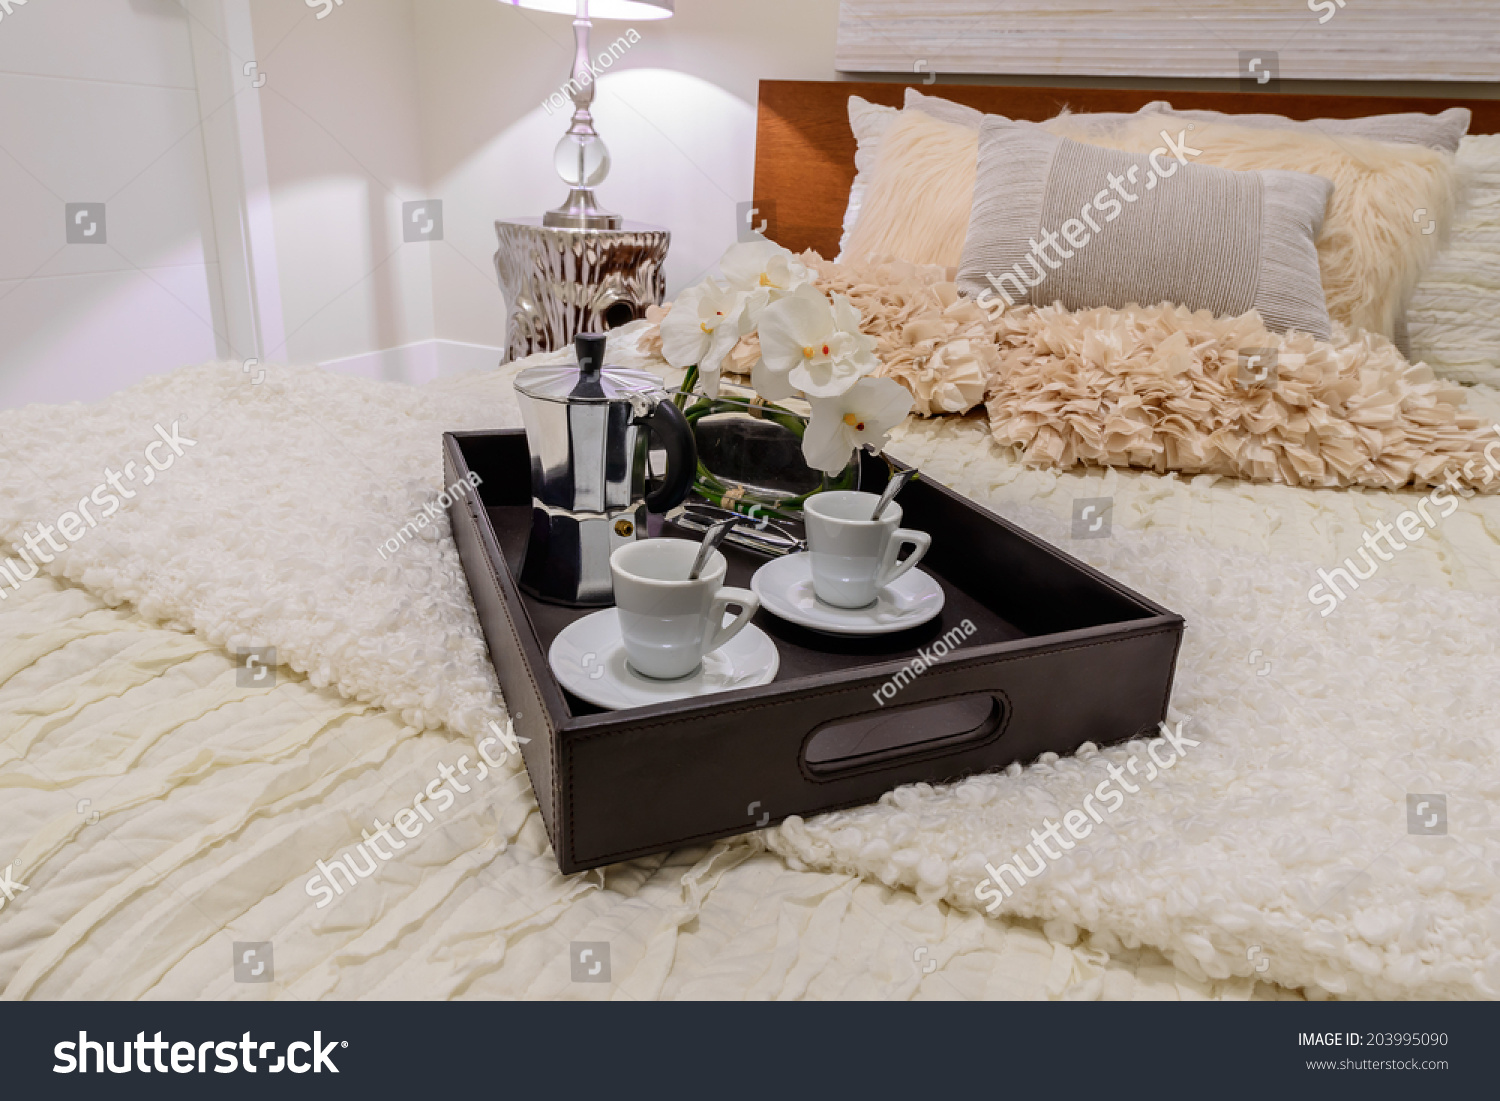 Decorative Tray Coffee Set On Bed Stock Photo Edit Now 203995090